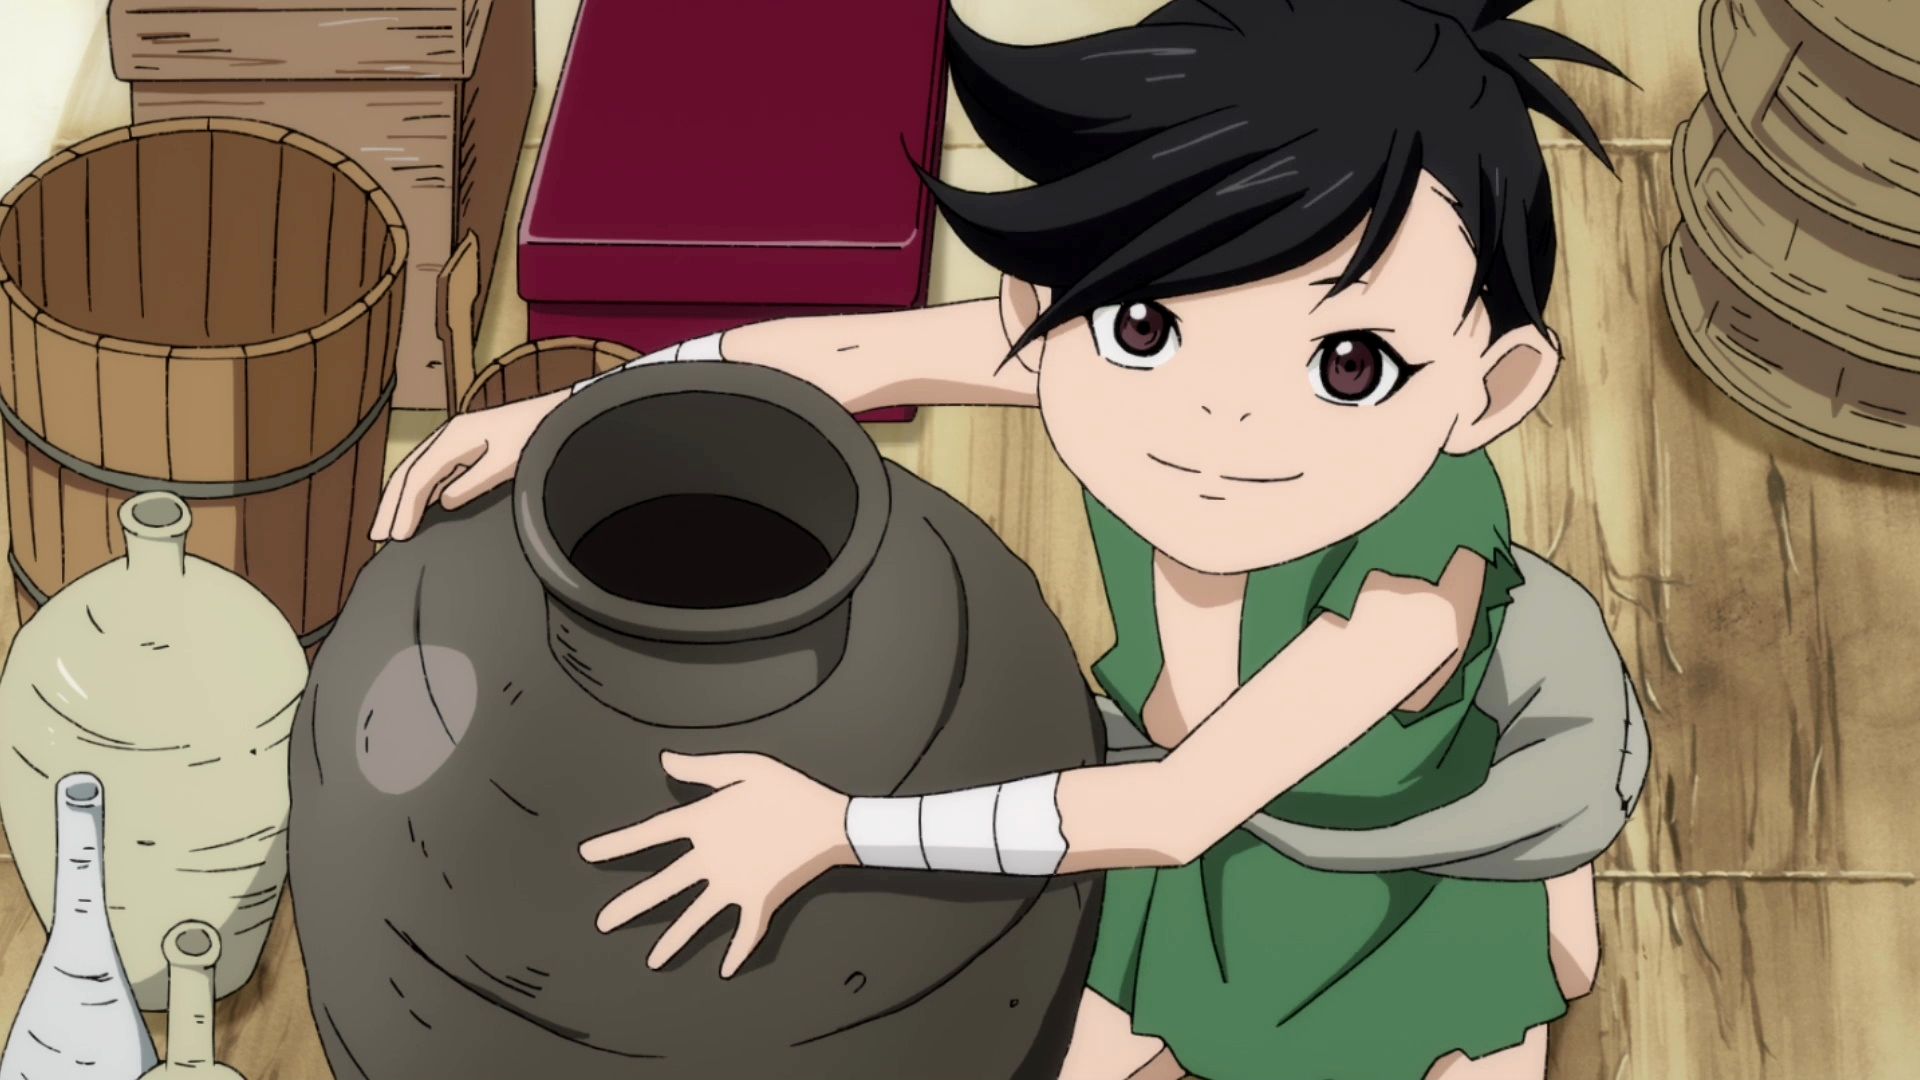 Dororo is a touching tale about a young thief and 'his' enigmatic companion